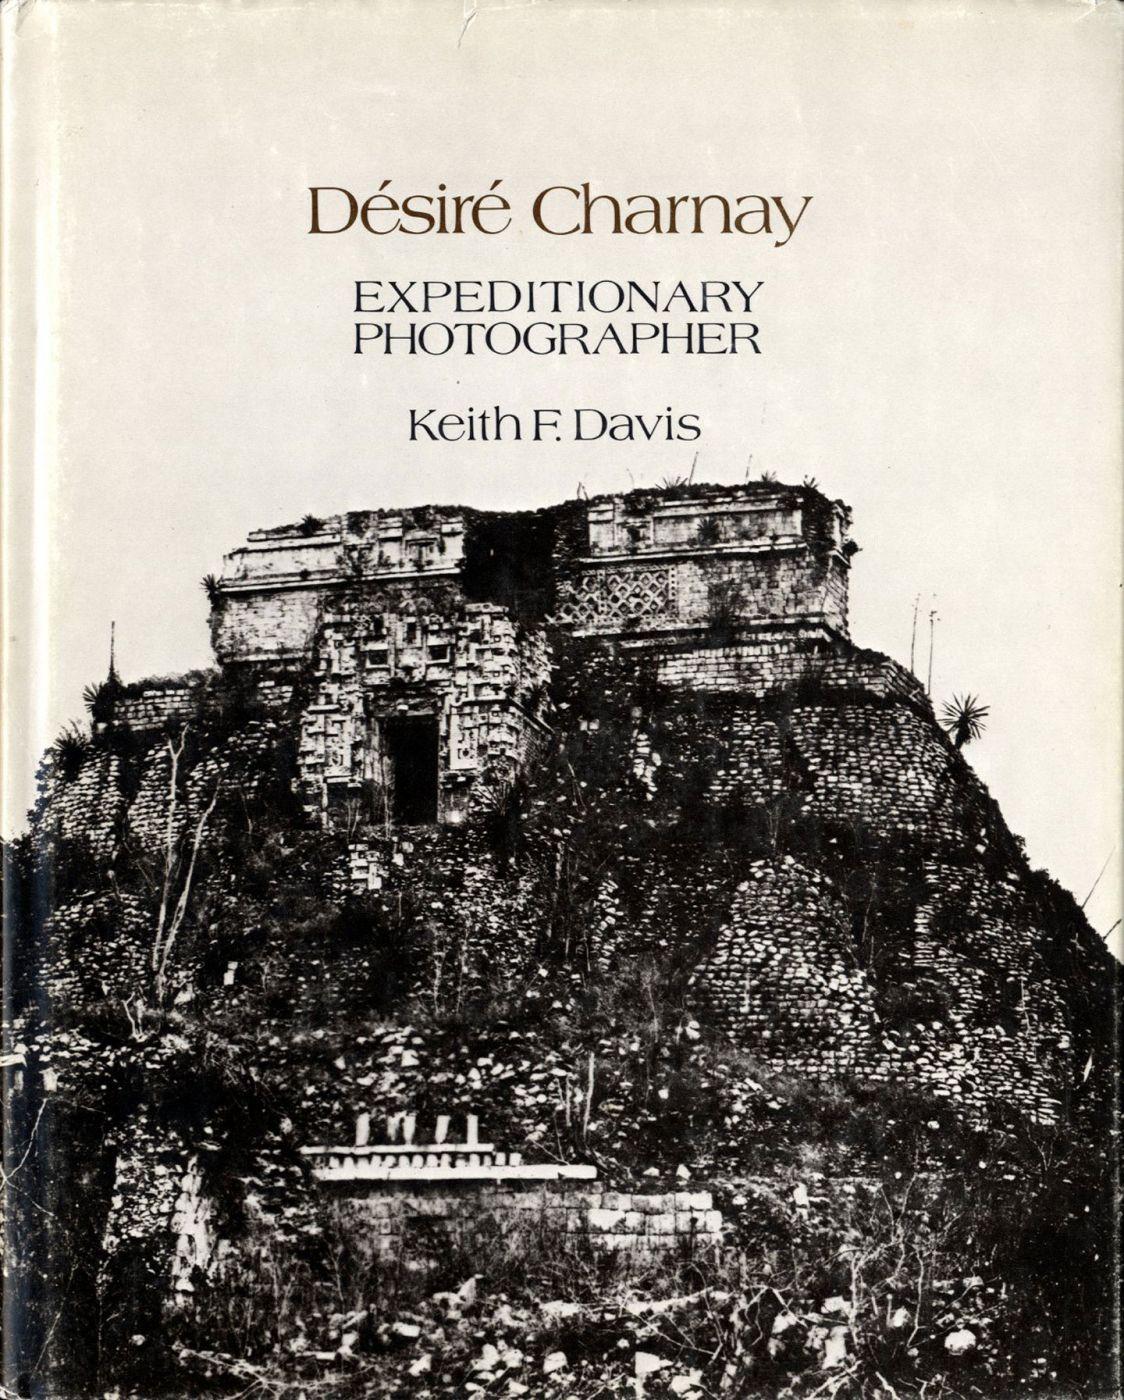 Desire Charnay, Expeditionary Photographer